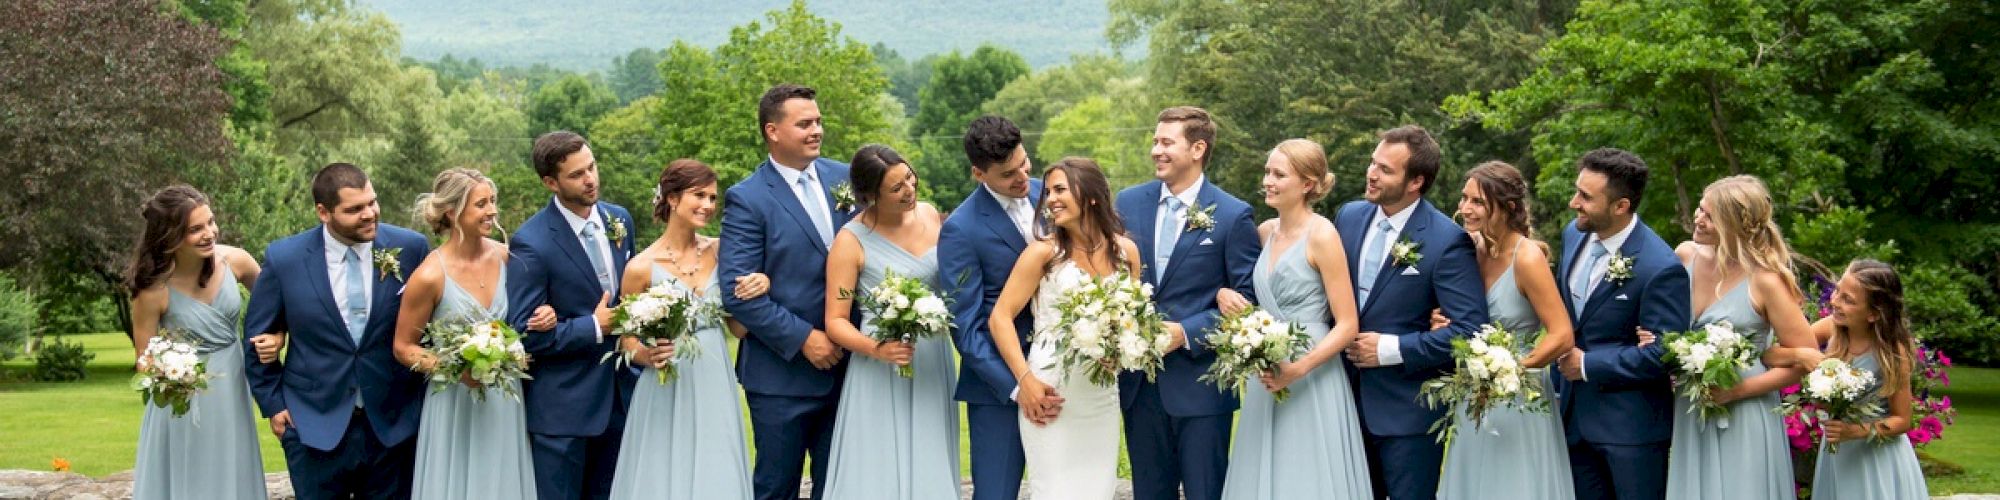 A wedding party stands in a line outdoors; the bride and groom are in the middle, surrounded by bridesmaids in light blue dresses and groomsmen in suits.